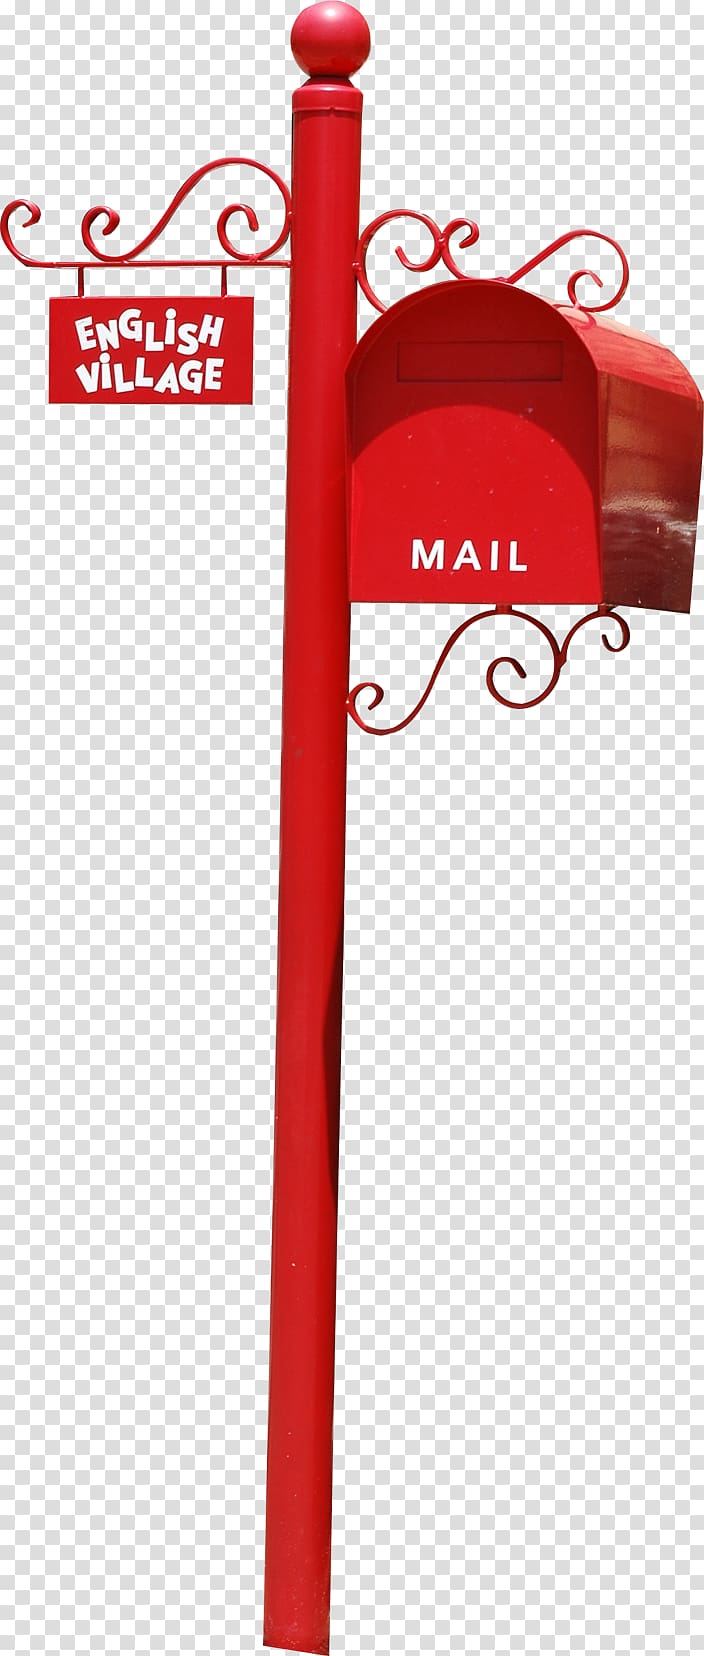 Letter box, Material Chinese red realistic iron mailbox transparent background PNG clipart